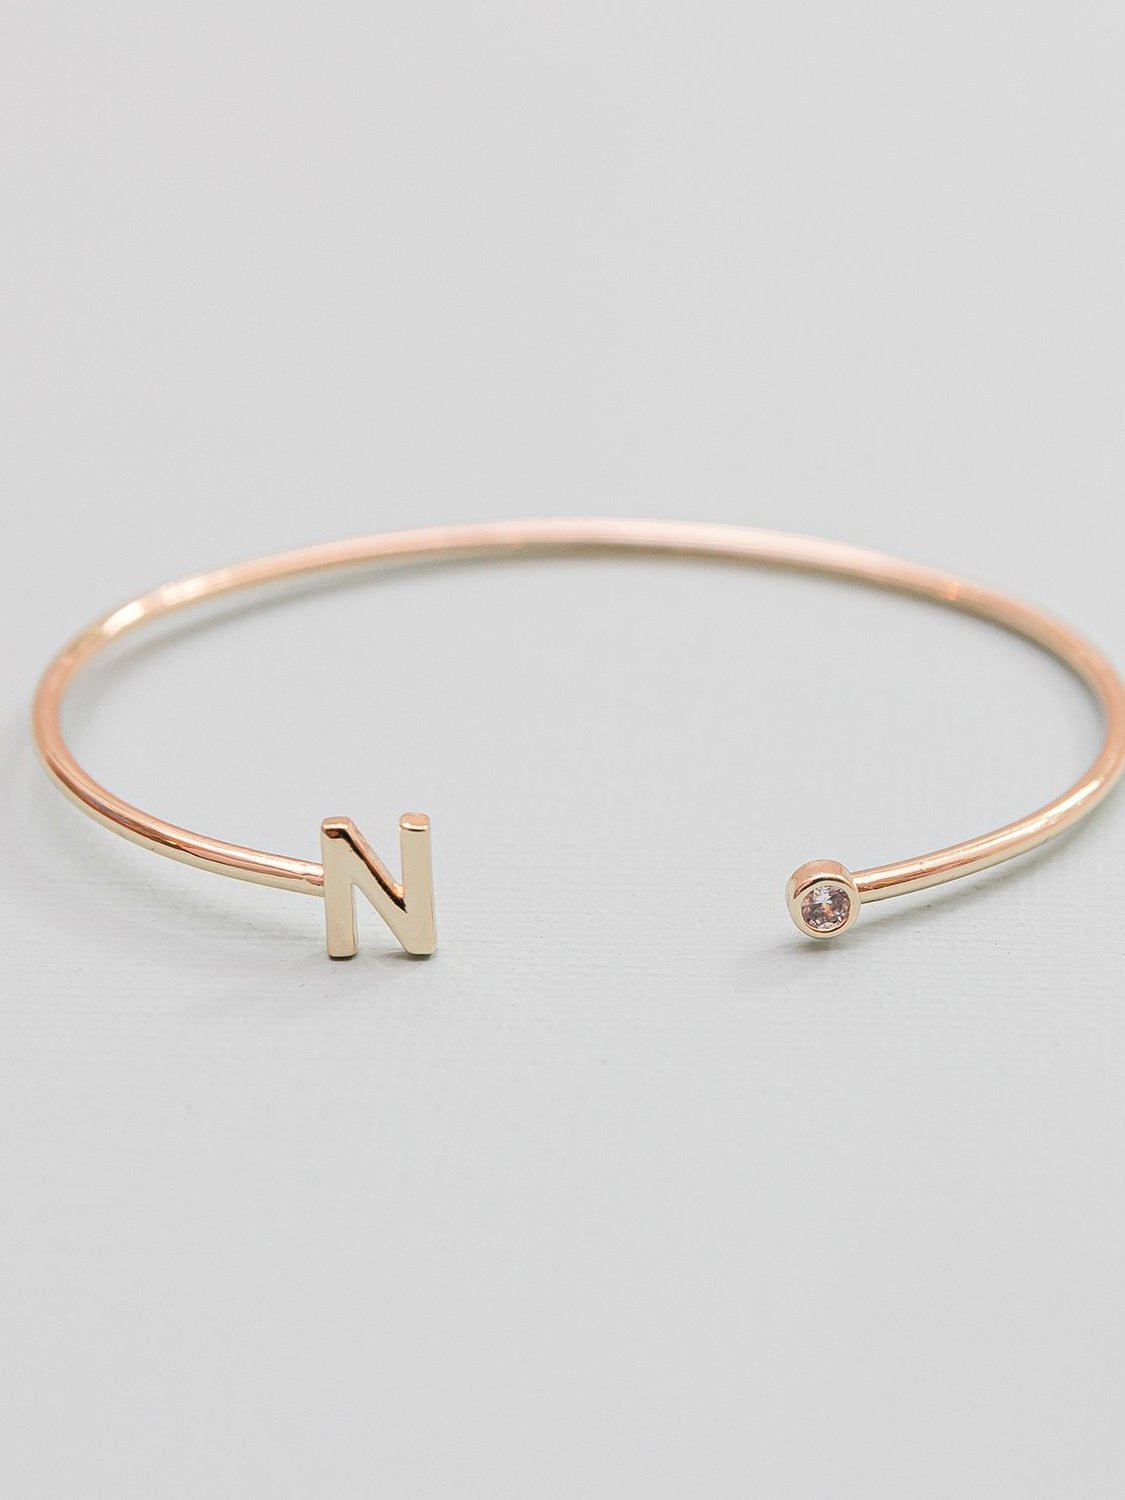 Michelle McDowell Initial Cuff Bracelet at Initial Styles Jupiter